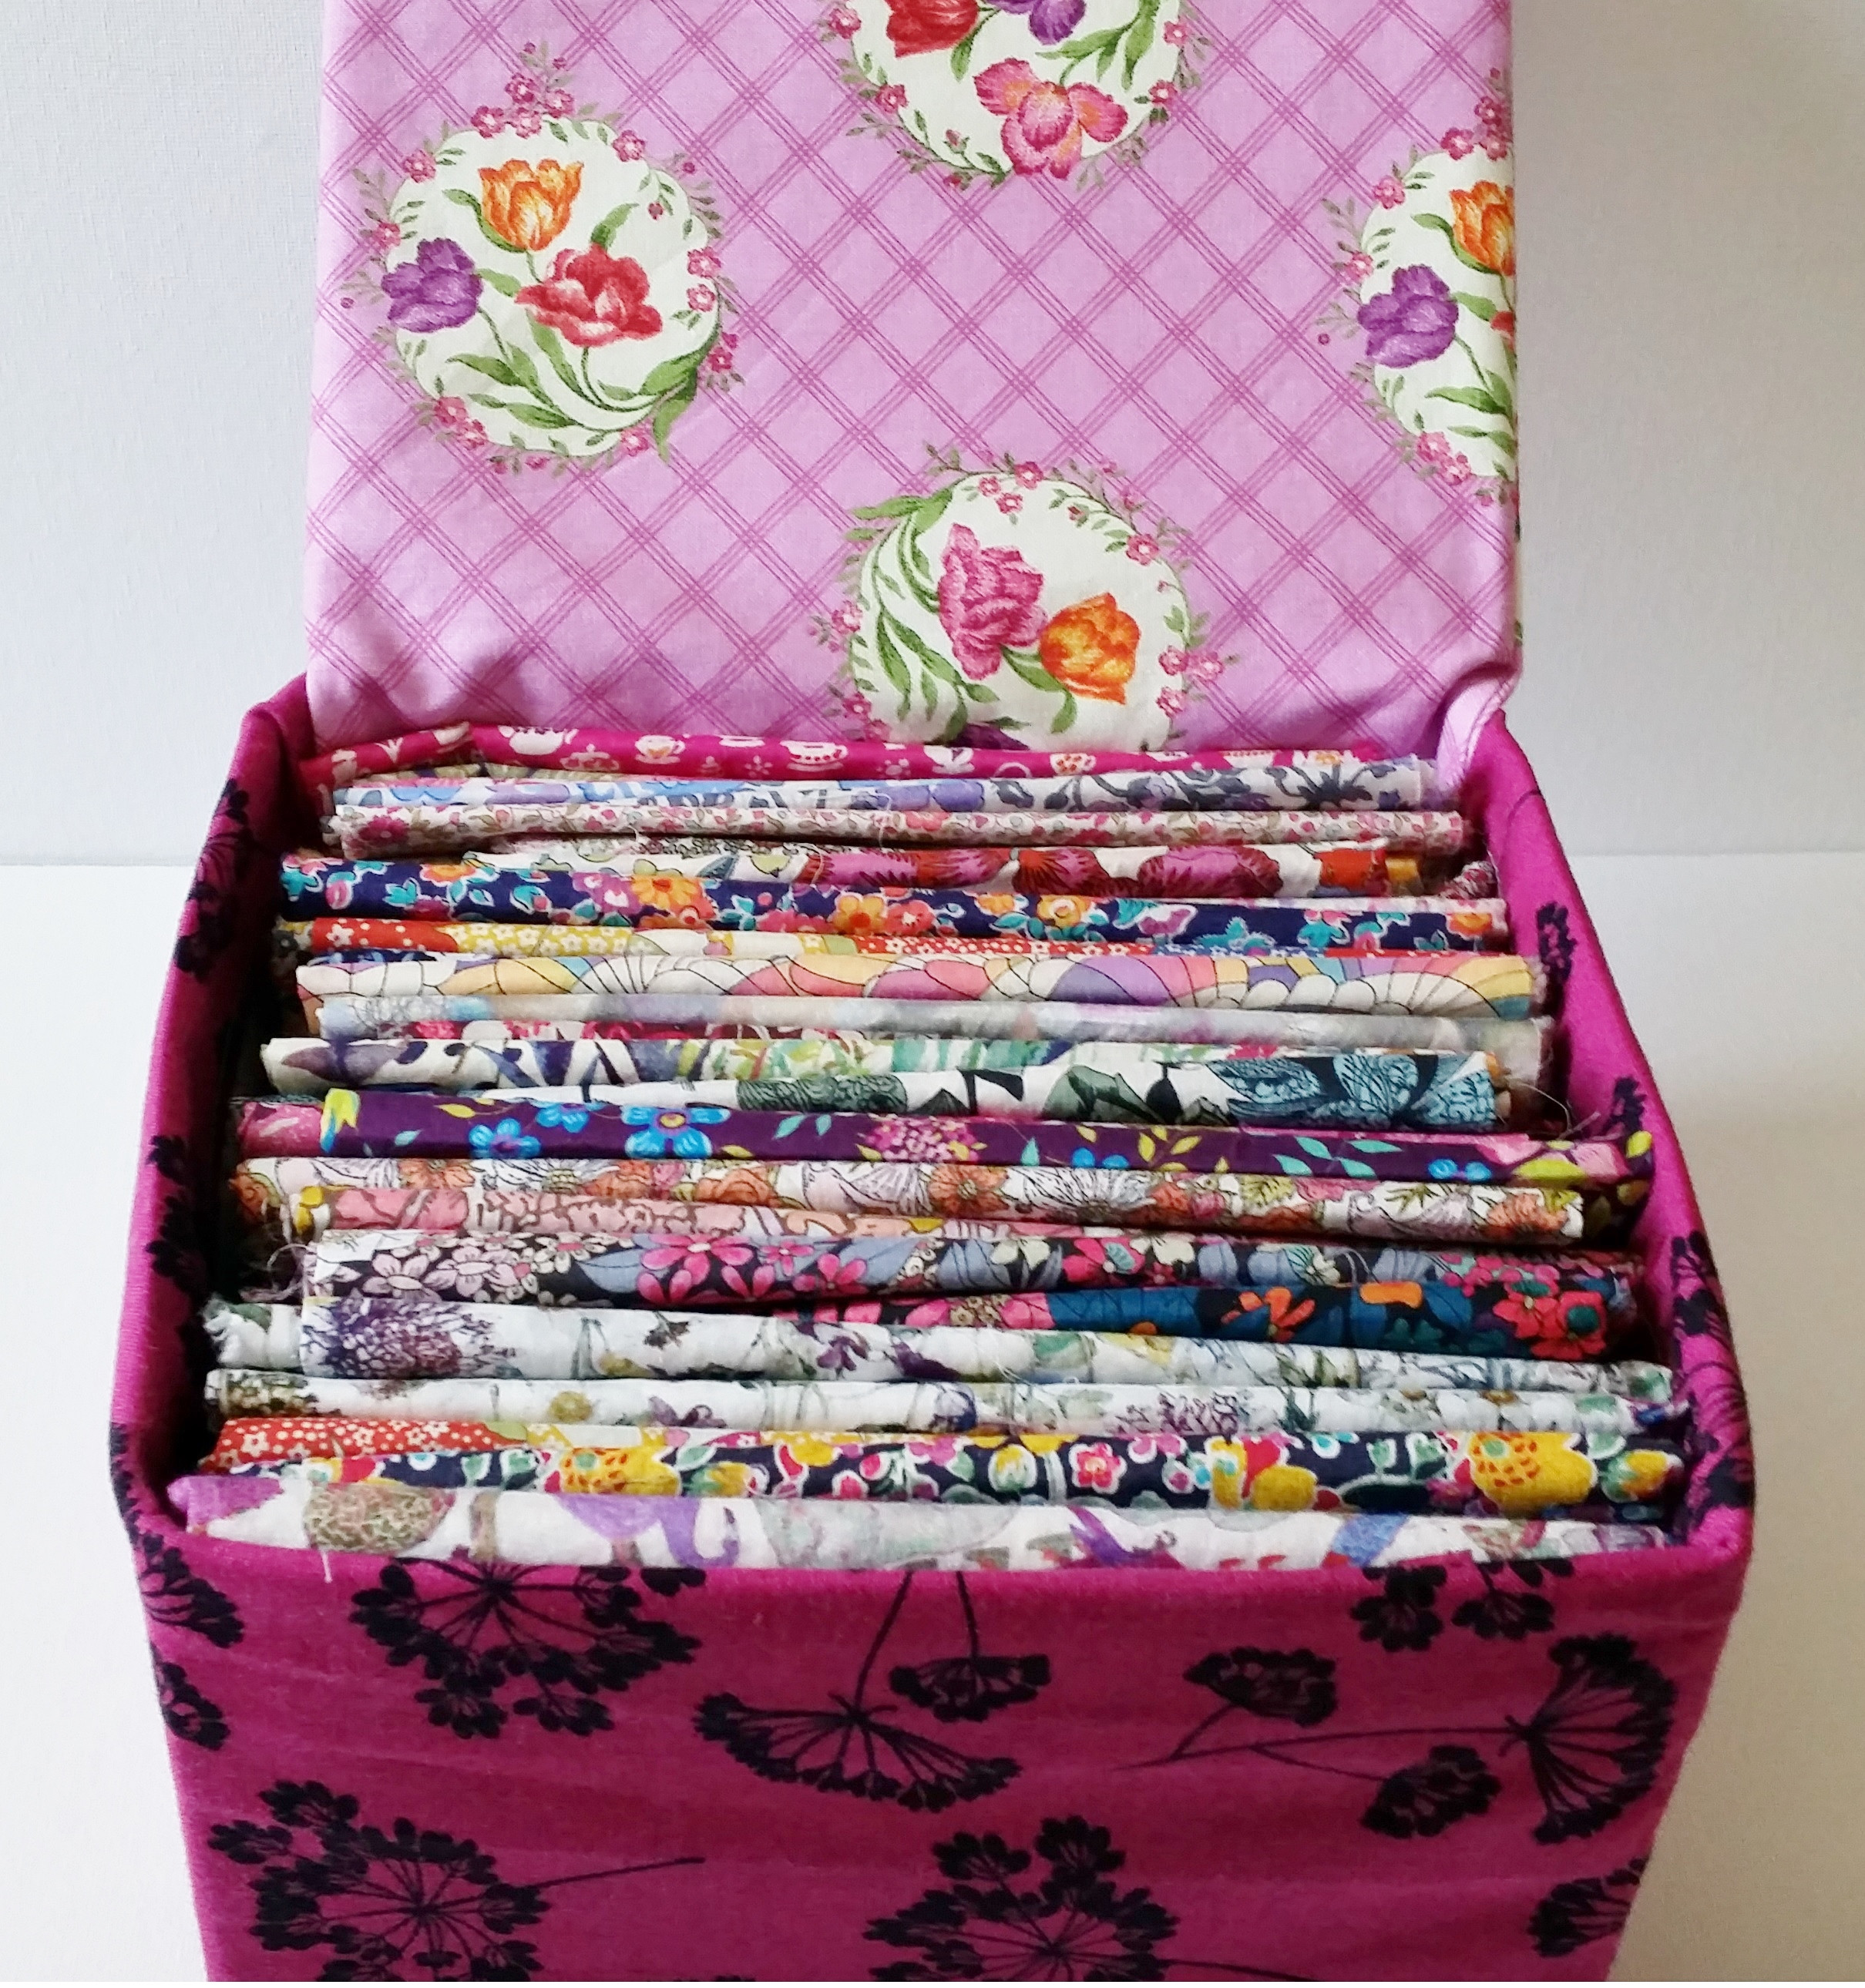 Fabric Boxes DIY
 DIY Fabric Box With Lid